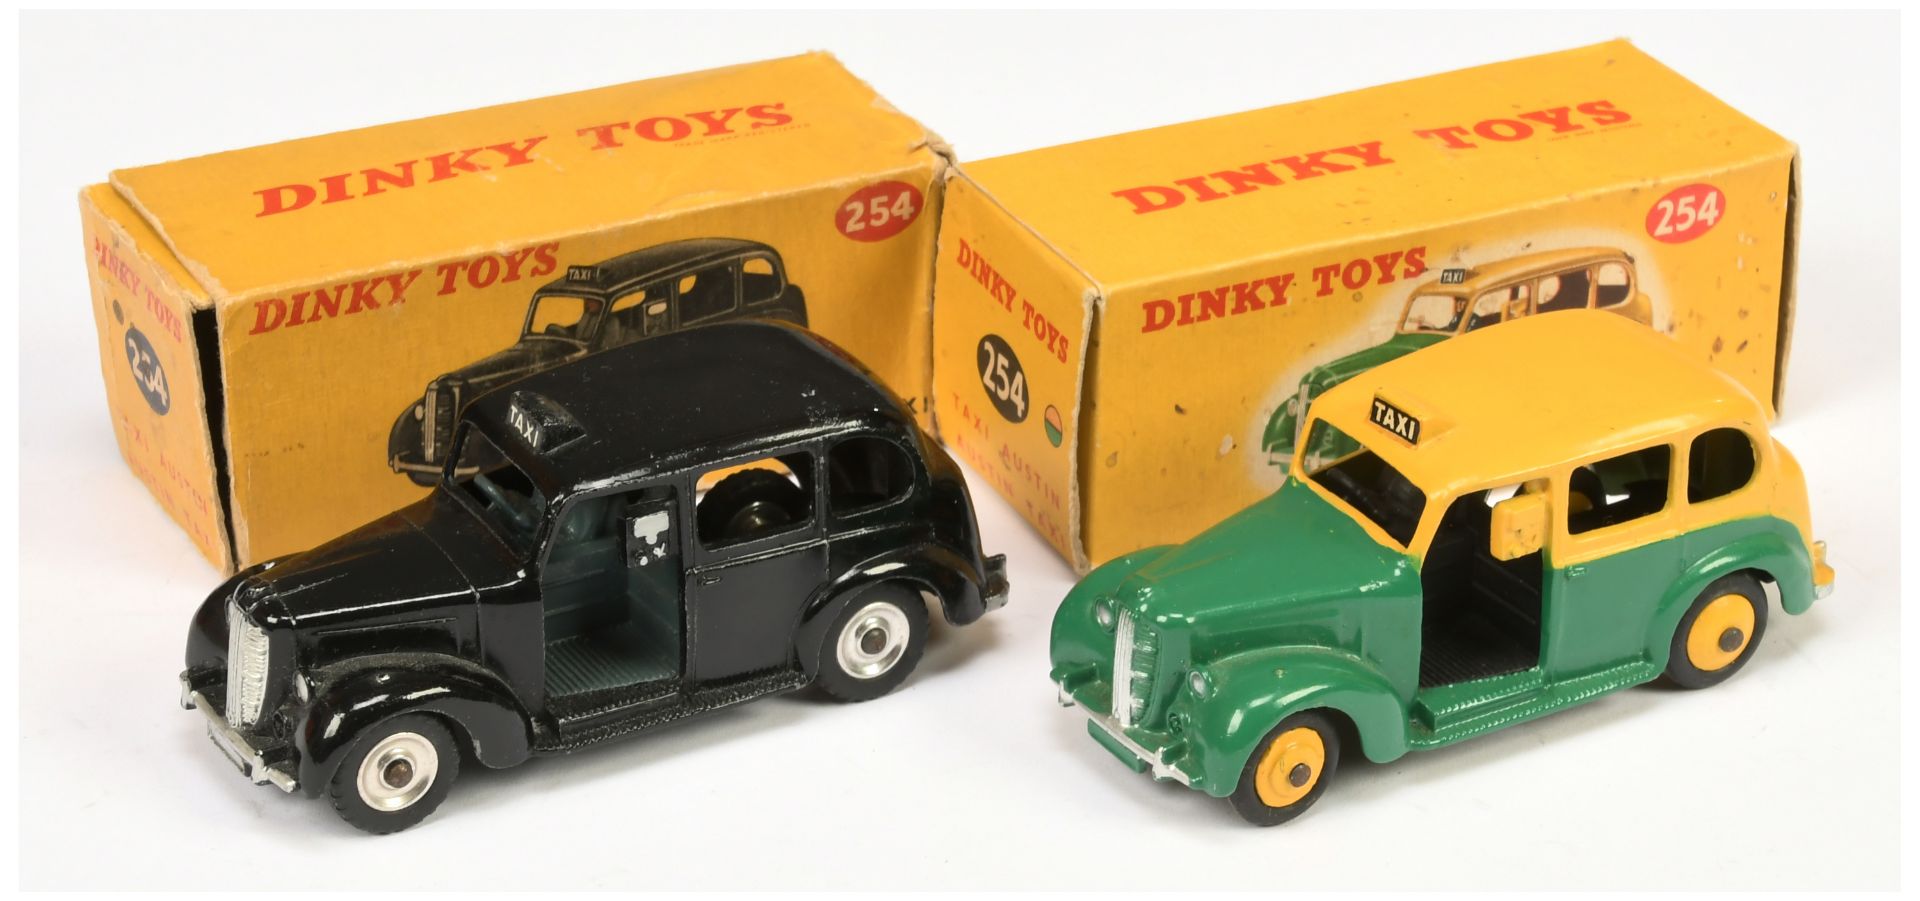 Dinky 2 x 254 Austin Taxi both have model number 254 base